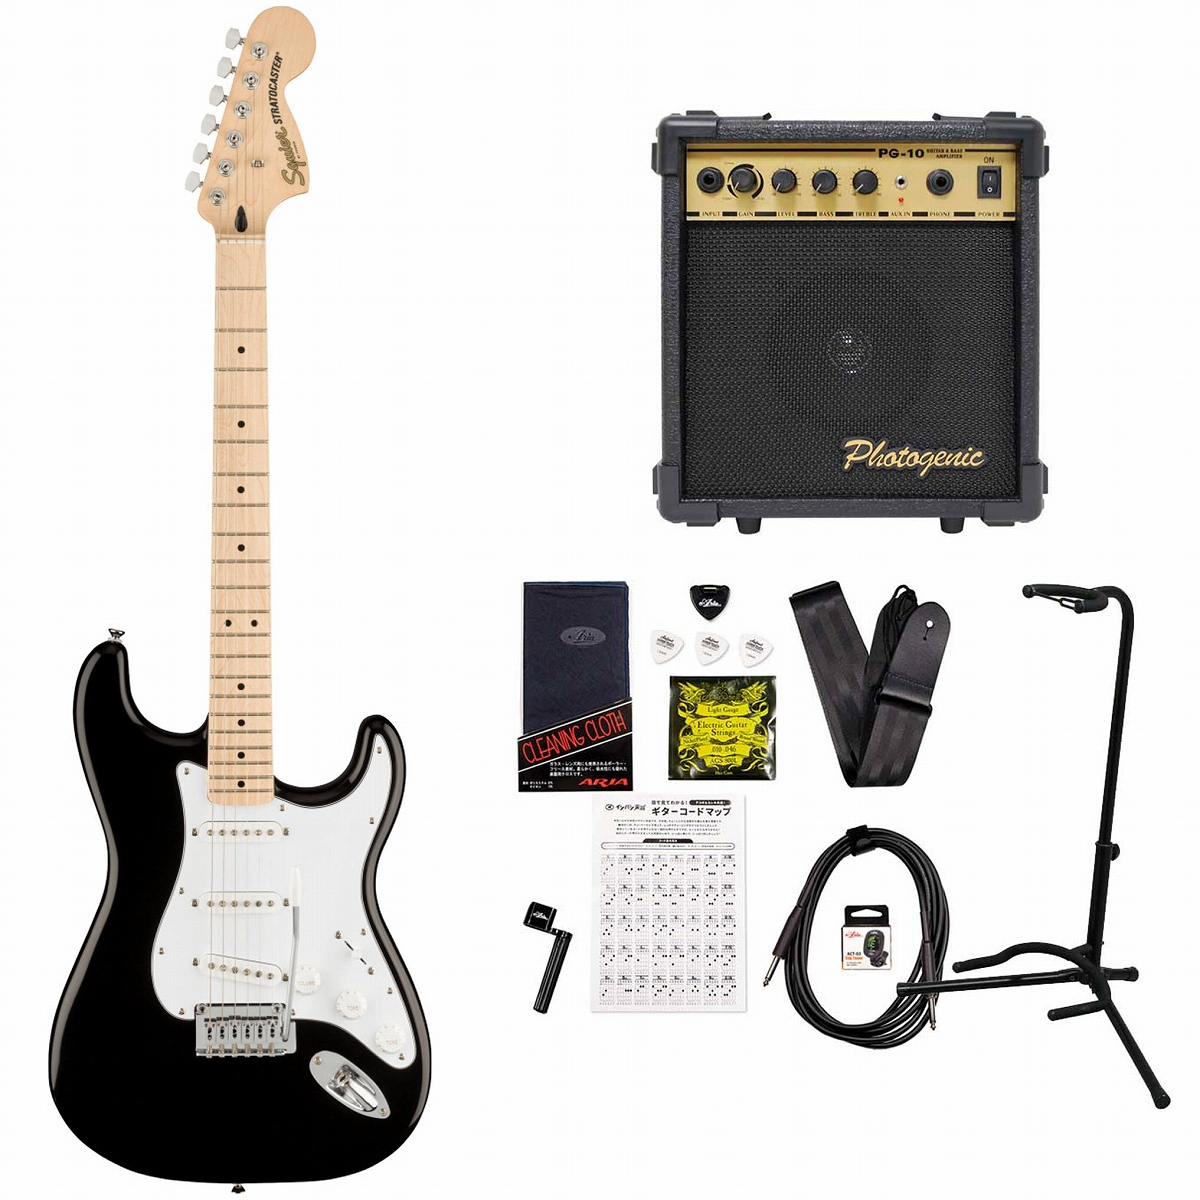 Squier / Affinity Series Stratocaster Maple White PG Black PG-10アンプ付属エレキギター初心者セット